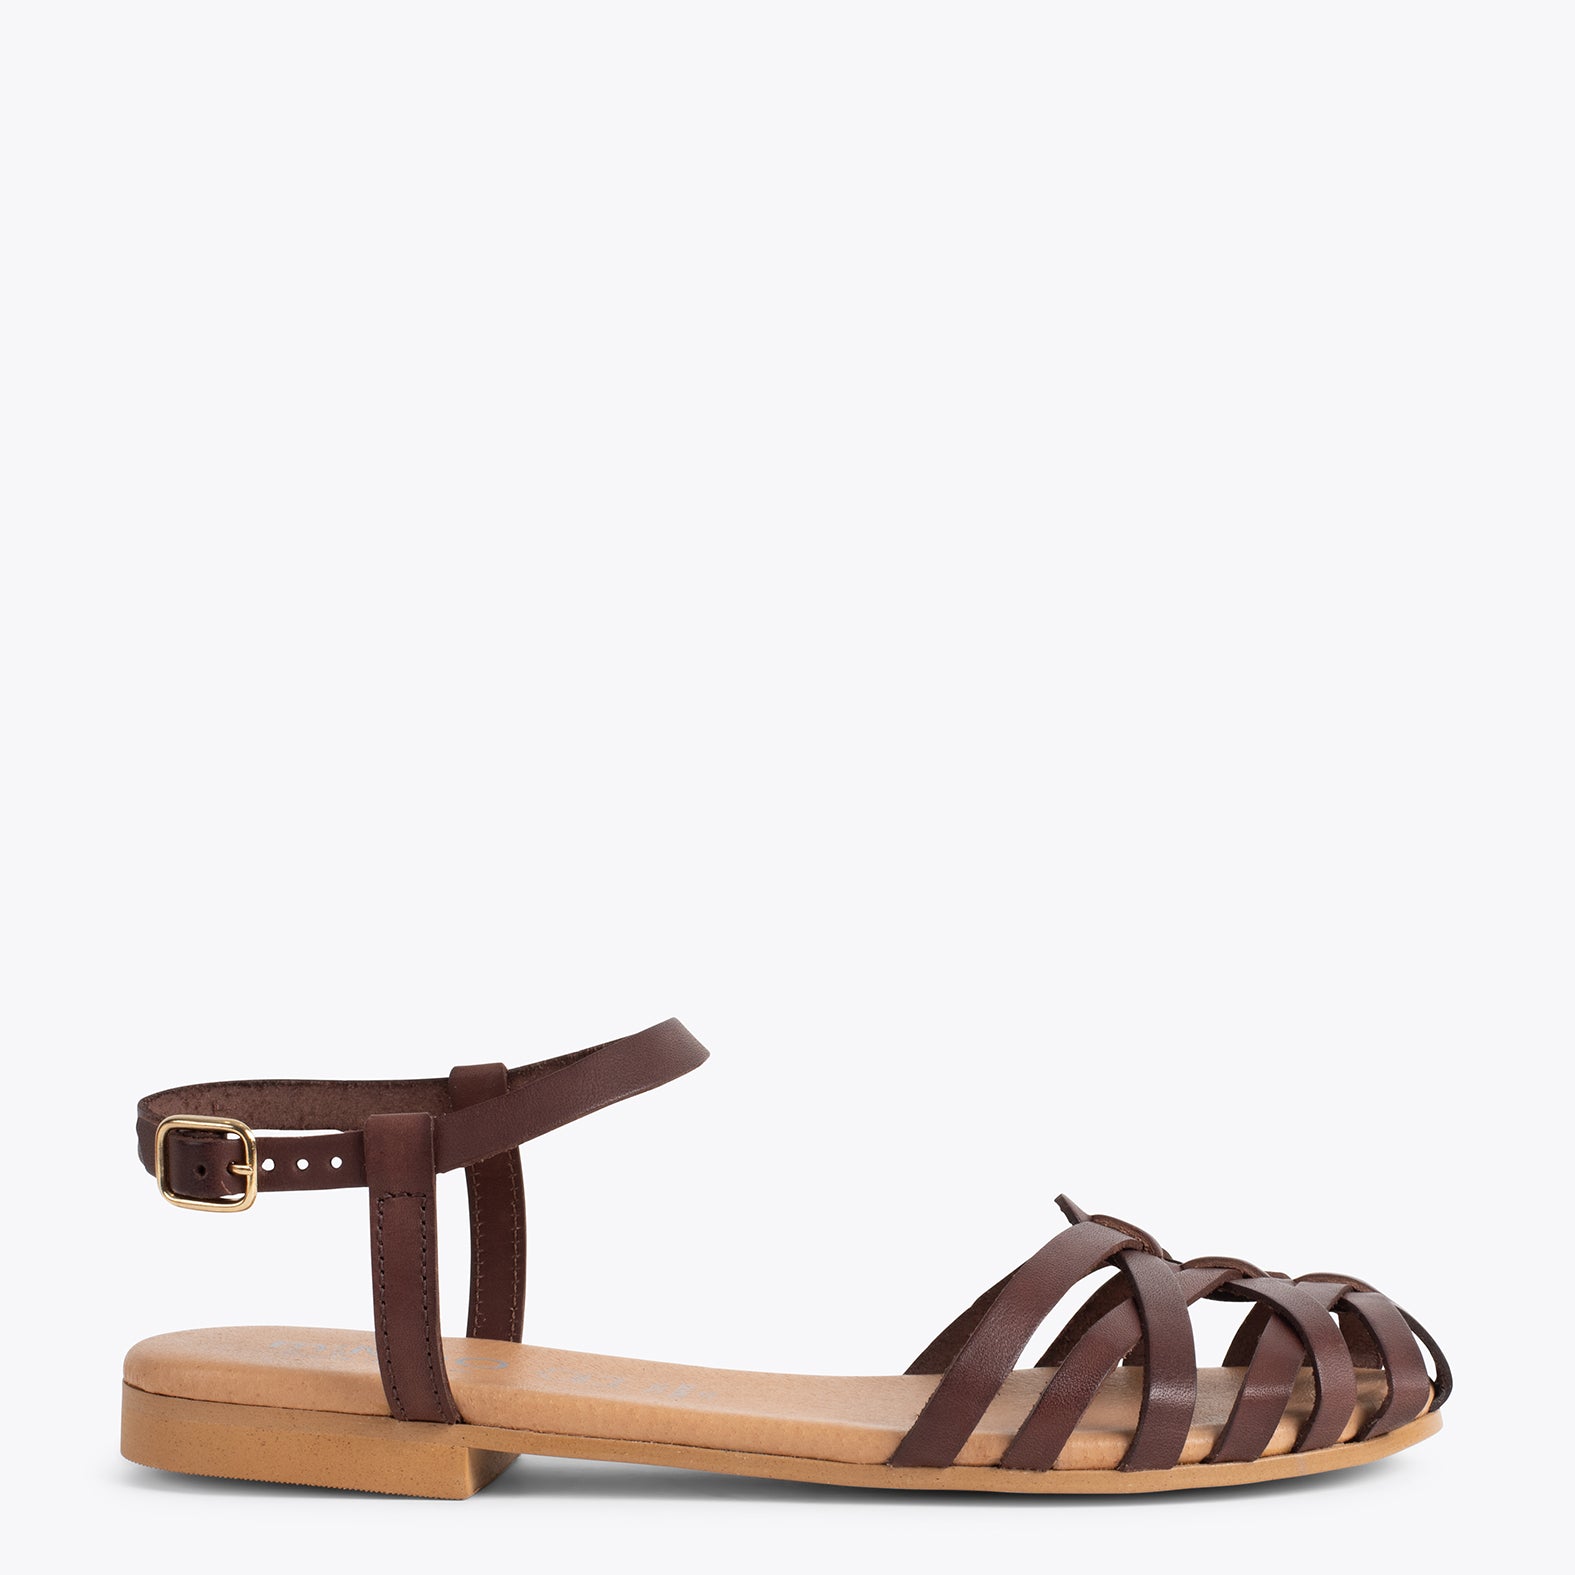 BEACH - BROWN sandal with straps